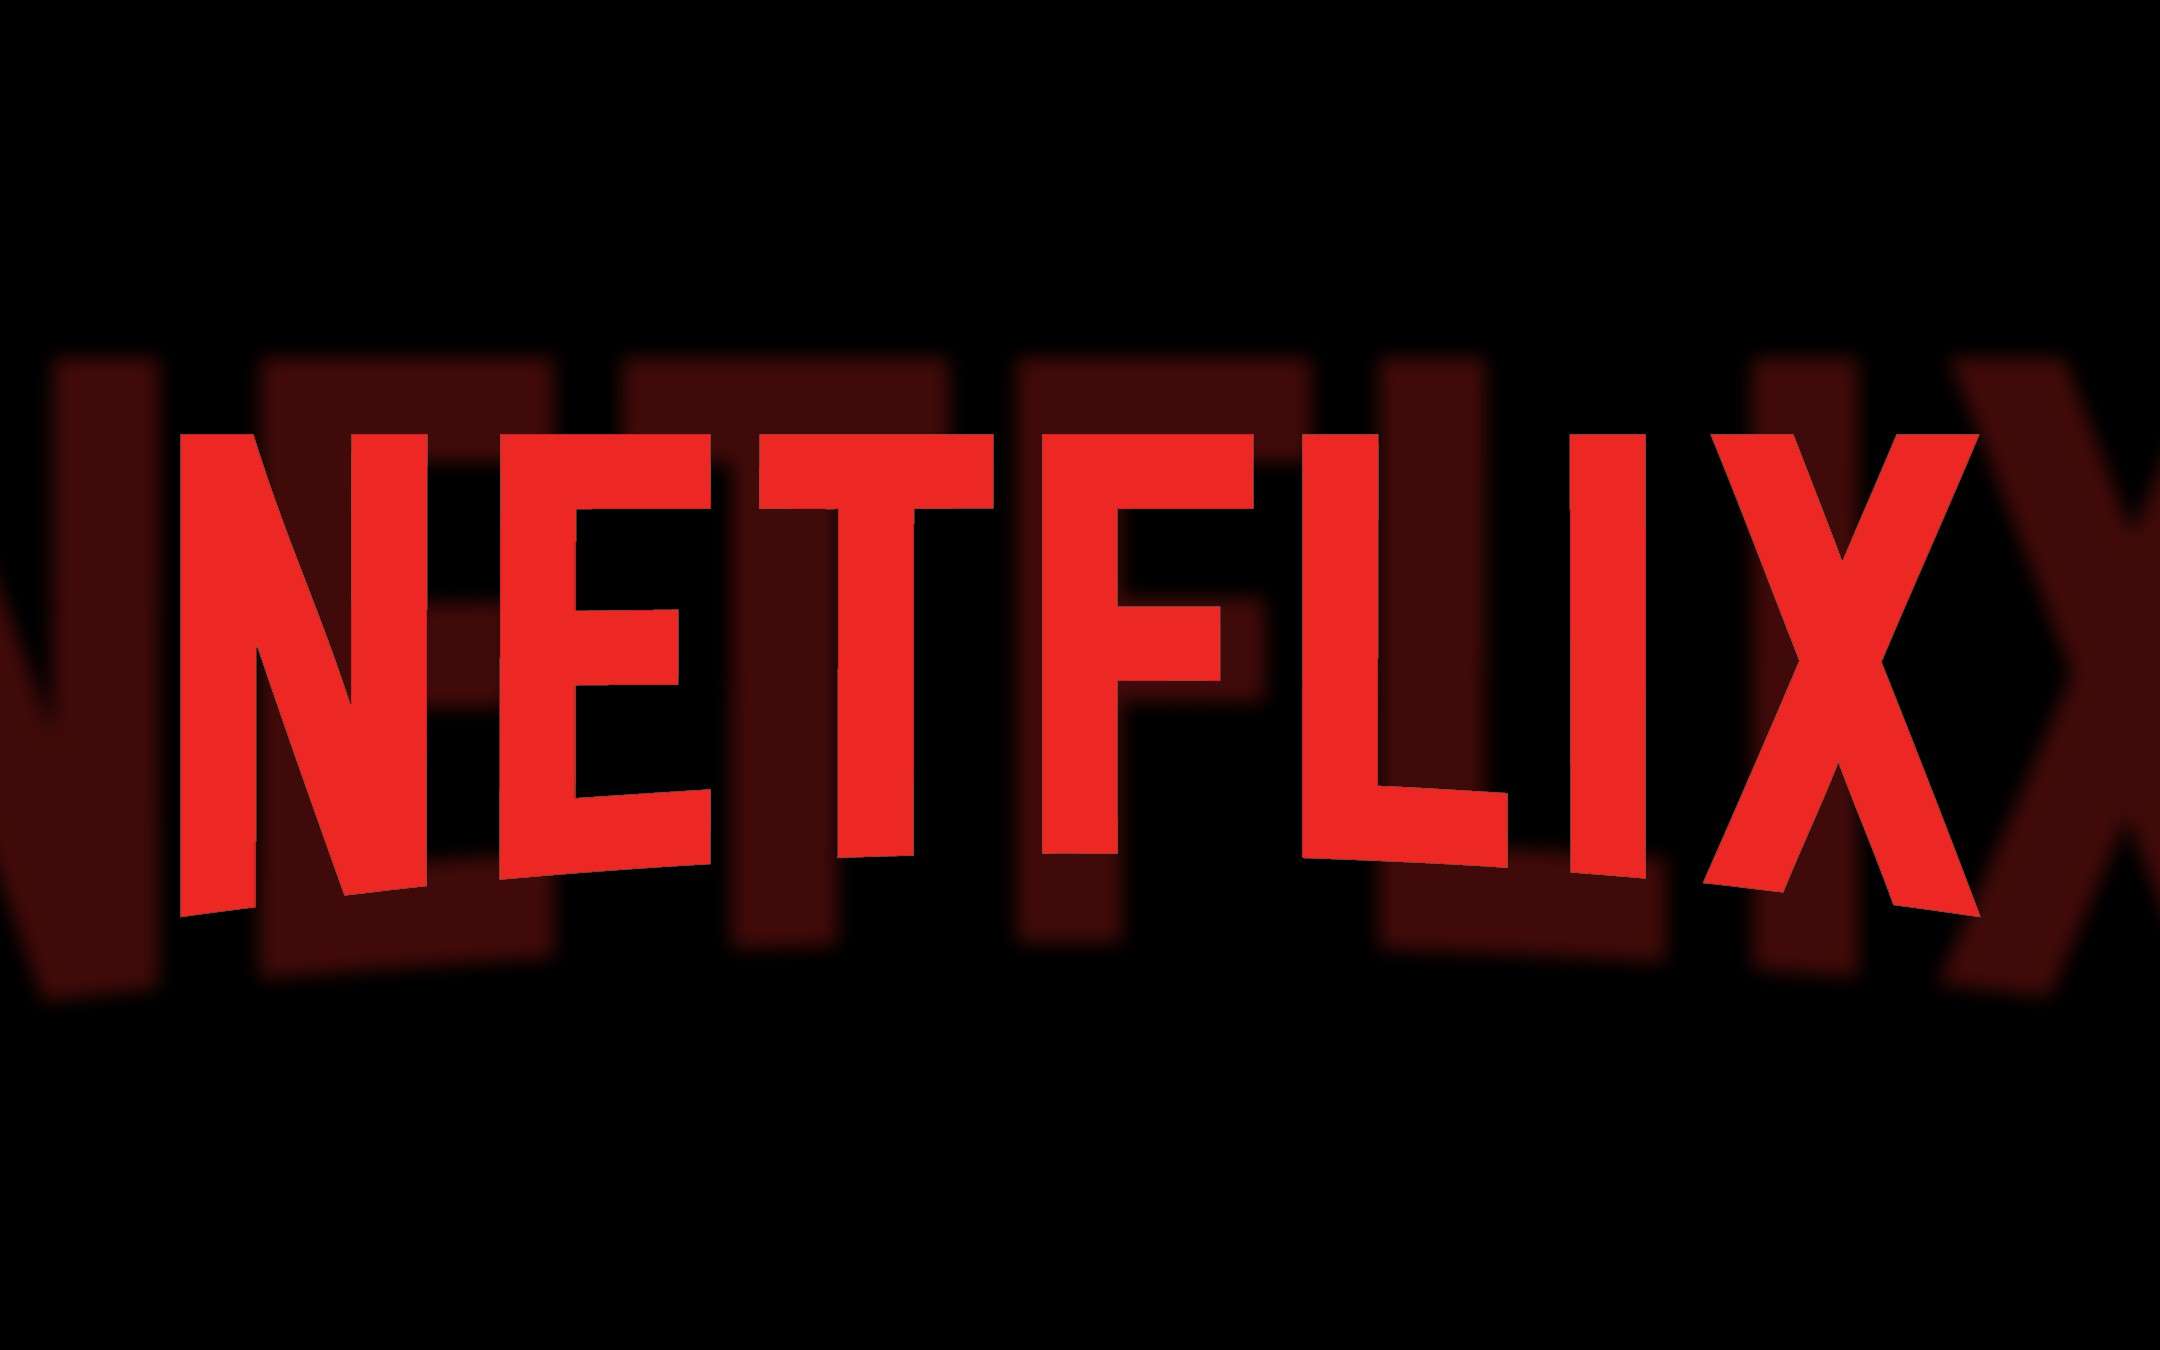 Netflix must pay to use the provider’s network